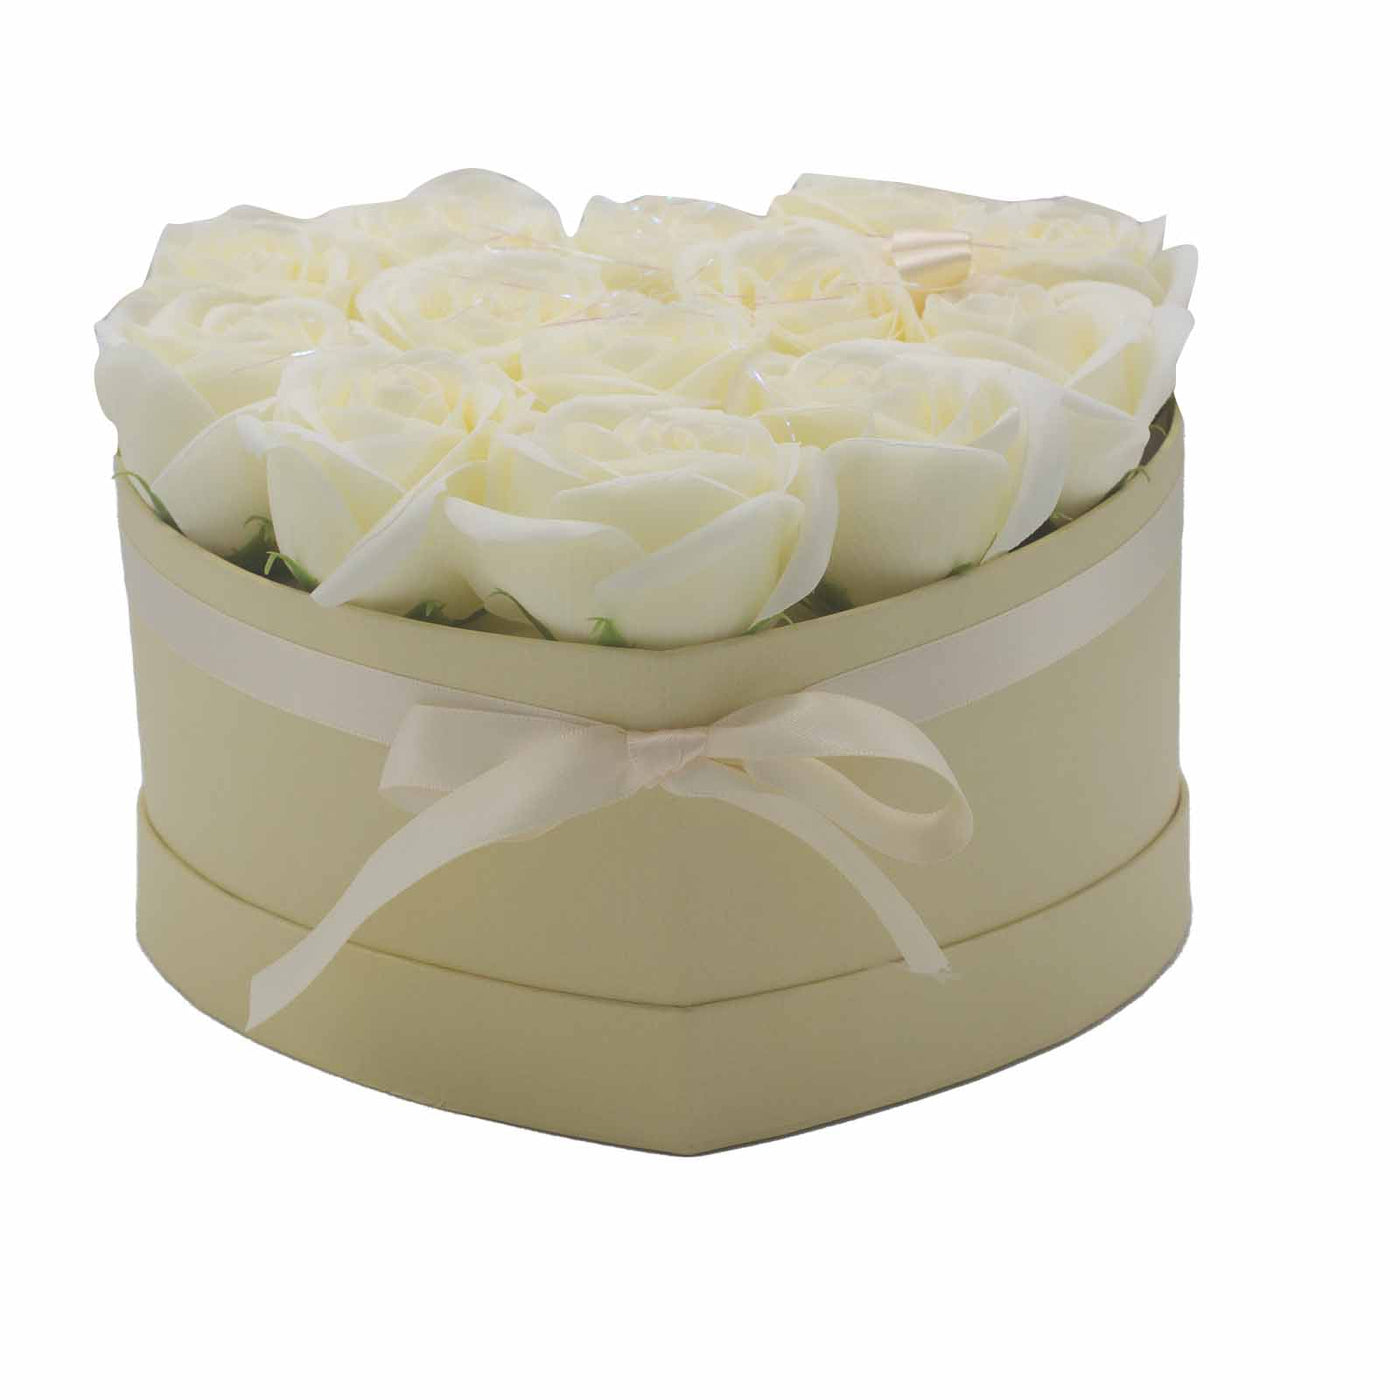 Body Soap Fragranced Flowers Gift Rose Bouquet - 13 Cream Roses In Heart Gift Box.